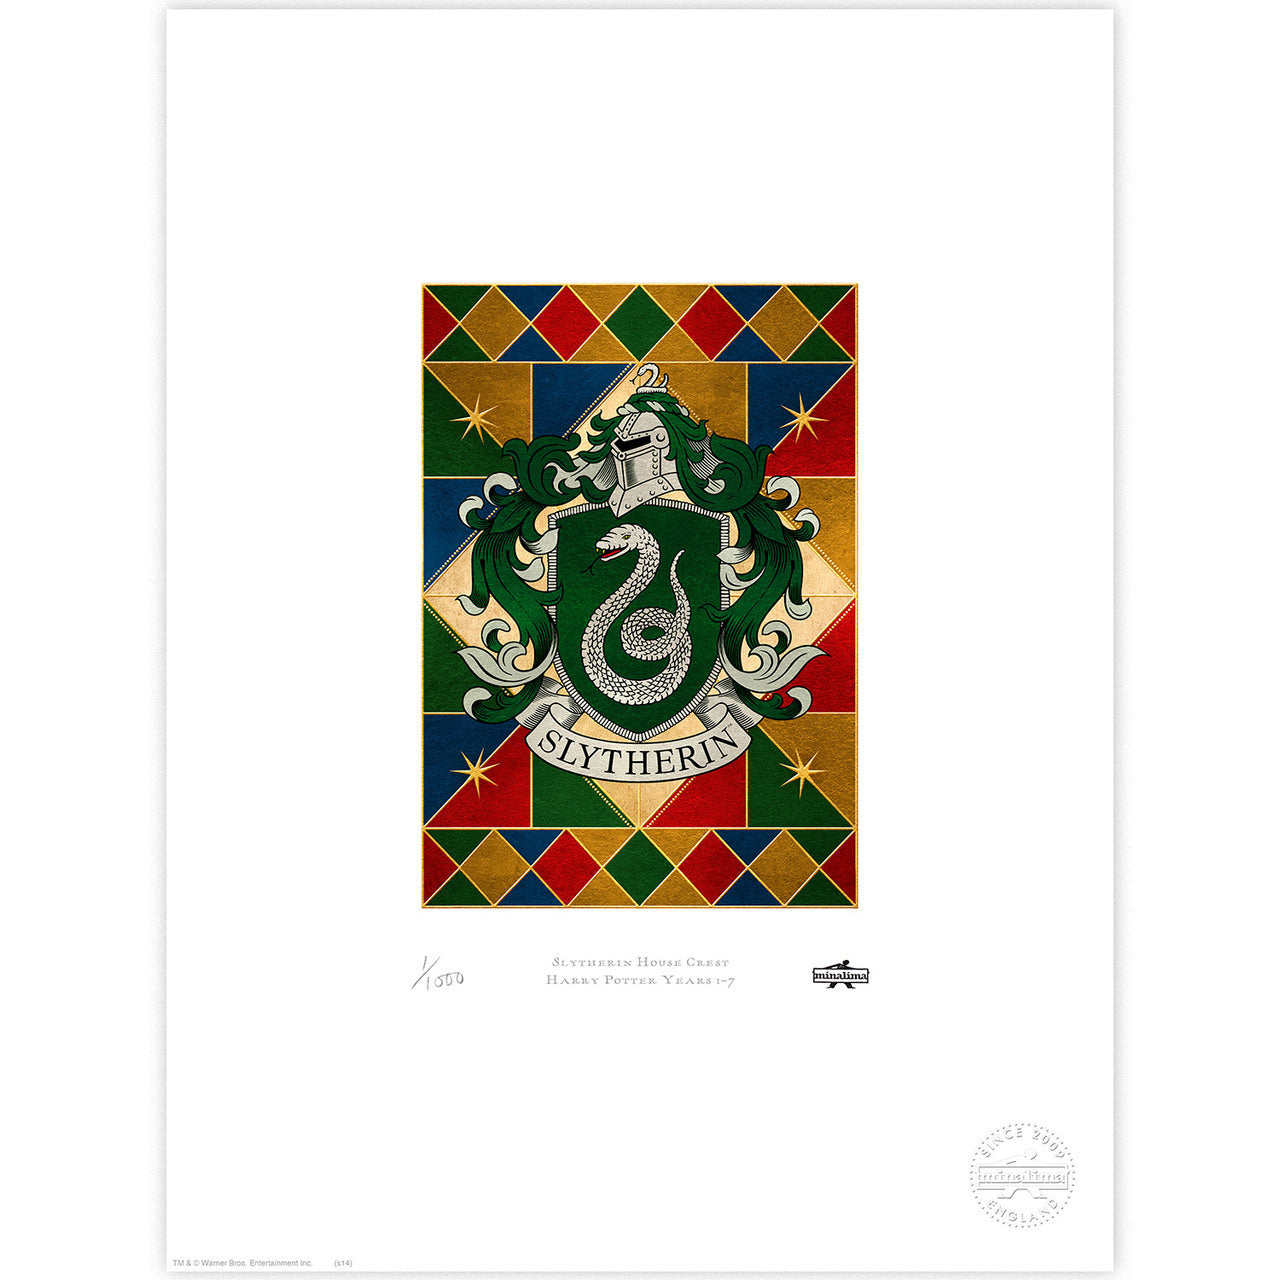 Slytherin House Crest Limited Edition Art Print